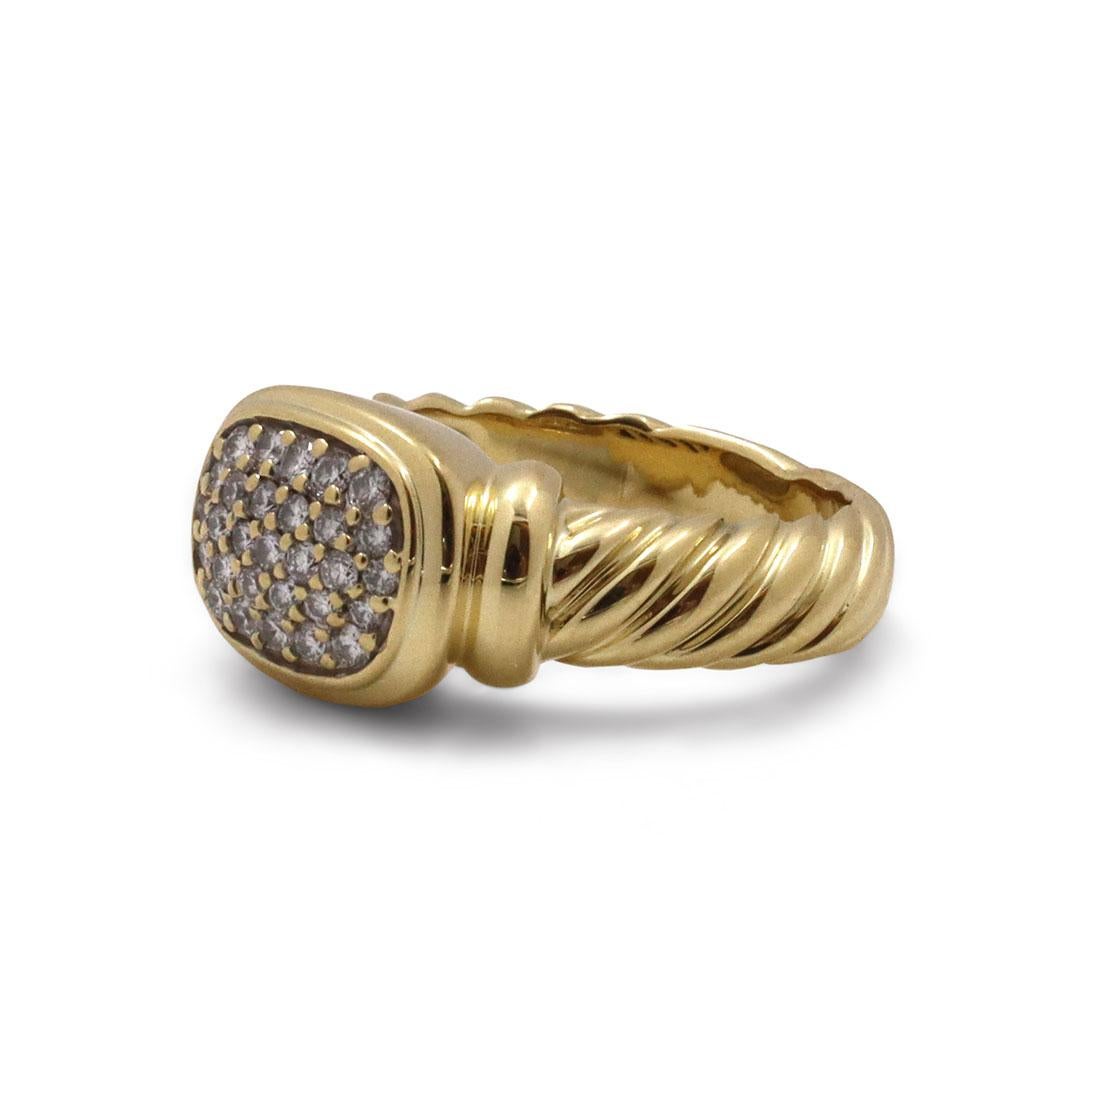 Authentic David Yurman 'Noblesse' ring crafted in 18 karat yellow gold. featuring a centerpiece pavé with approximately 0.30cts of glittering round brilliant cut diamonds.  Size 7.  Signed DY, 750.  CIRCA 2010s

Brand: David Yurman
Collection: